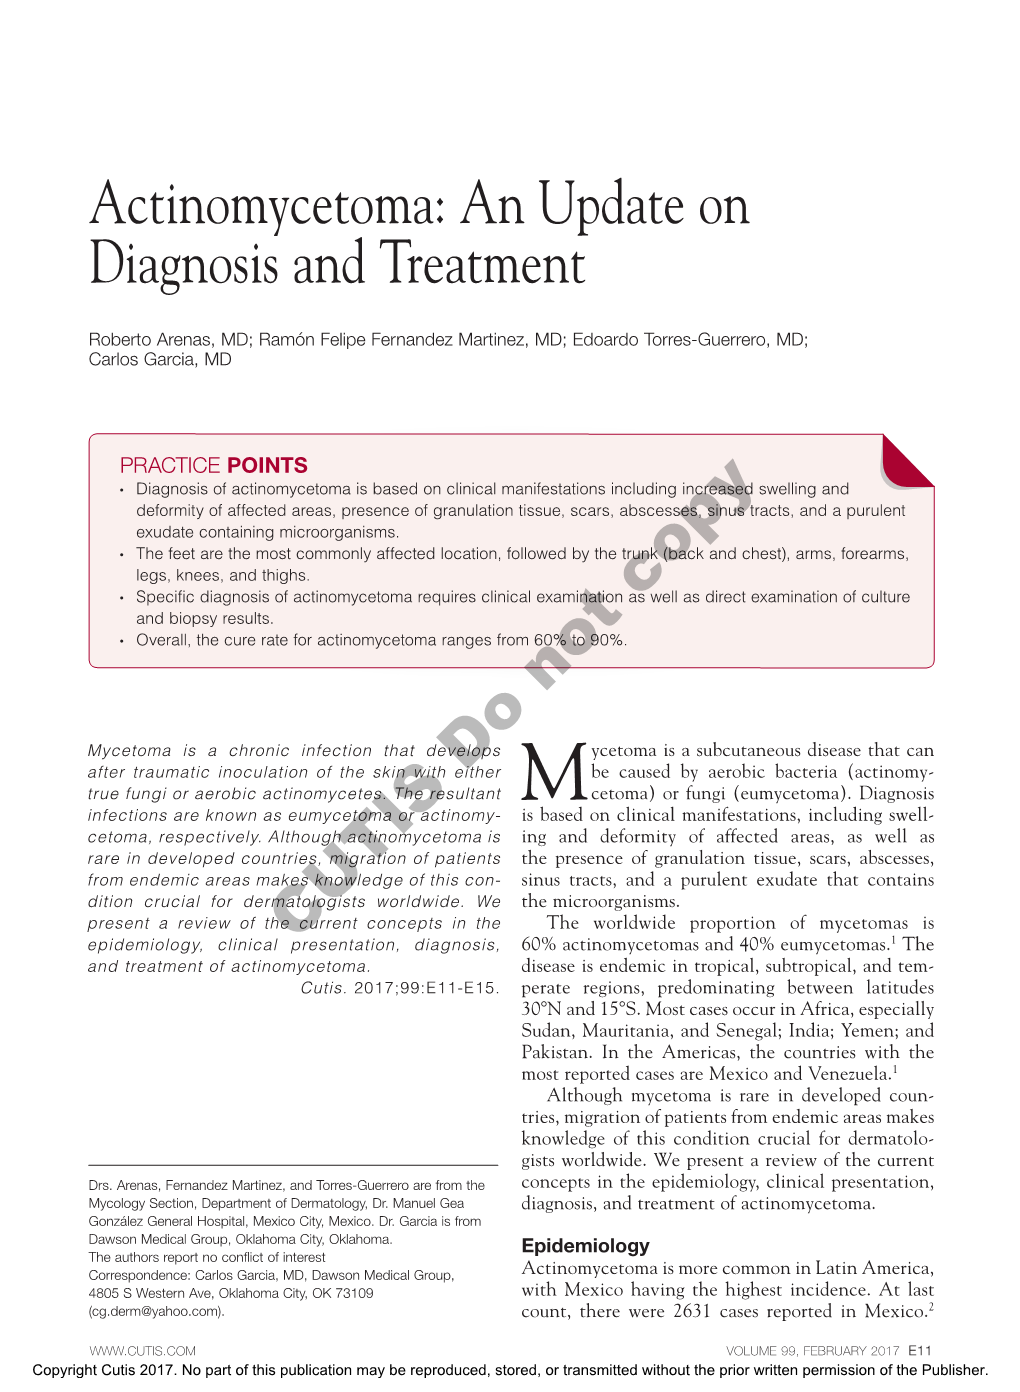 Actinomycetoma: an Update on Diagnosis and Treatment